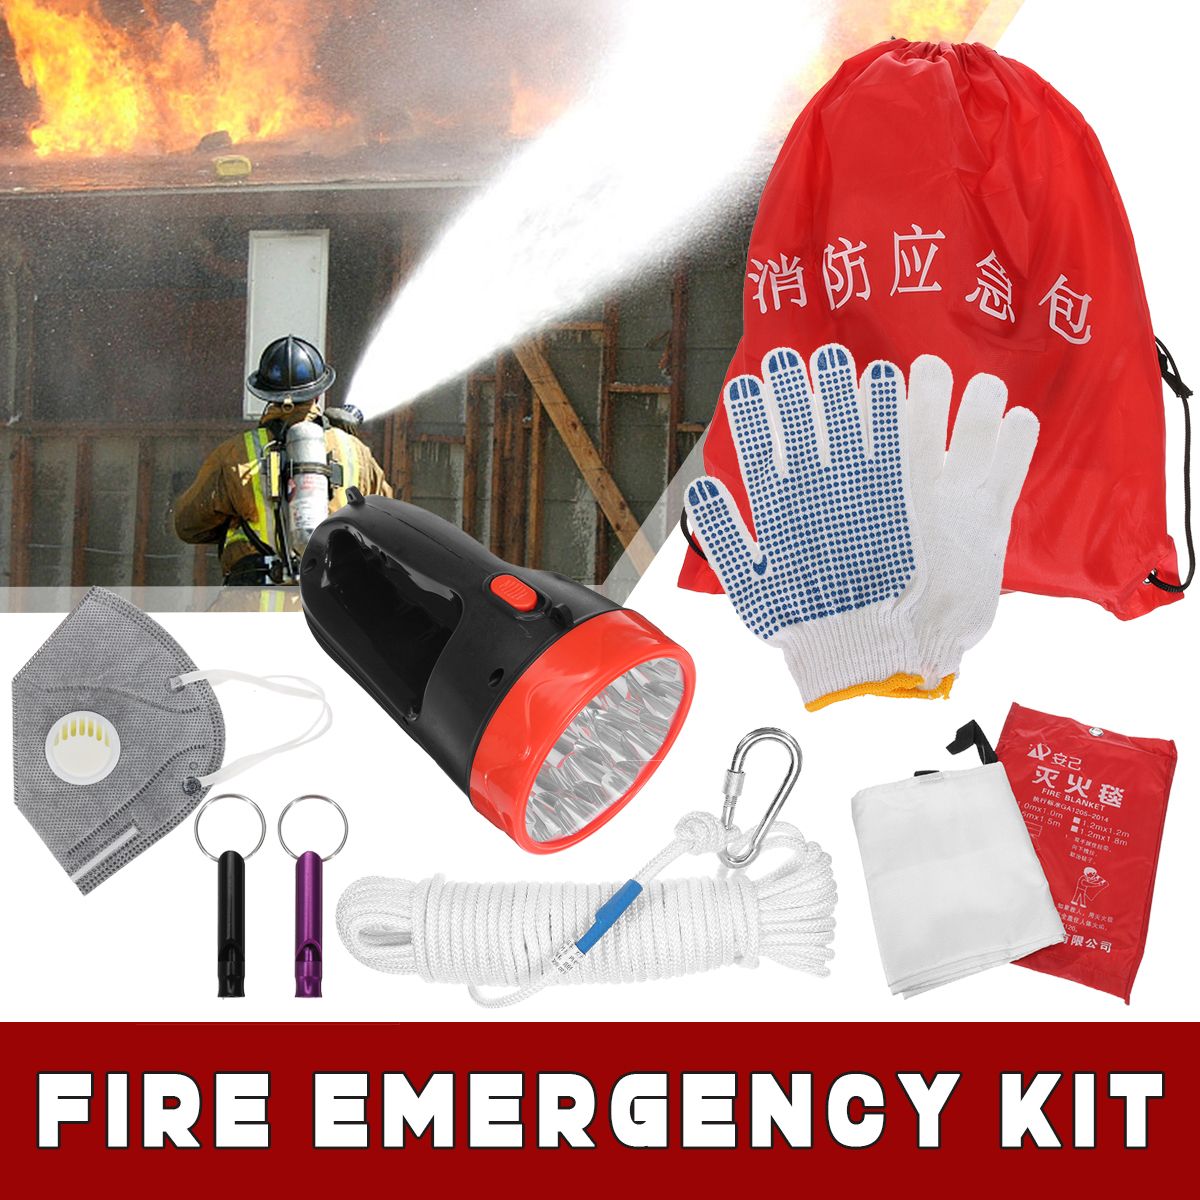 Family-Fire-Emergency-Kit-Descending-Rope-Mask-Whistle-Survival-Tools-Accessories-1537071